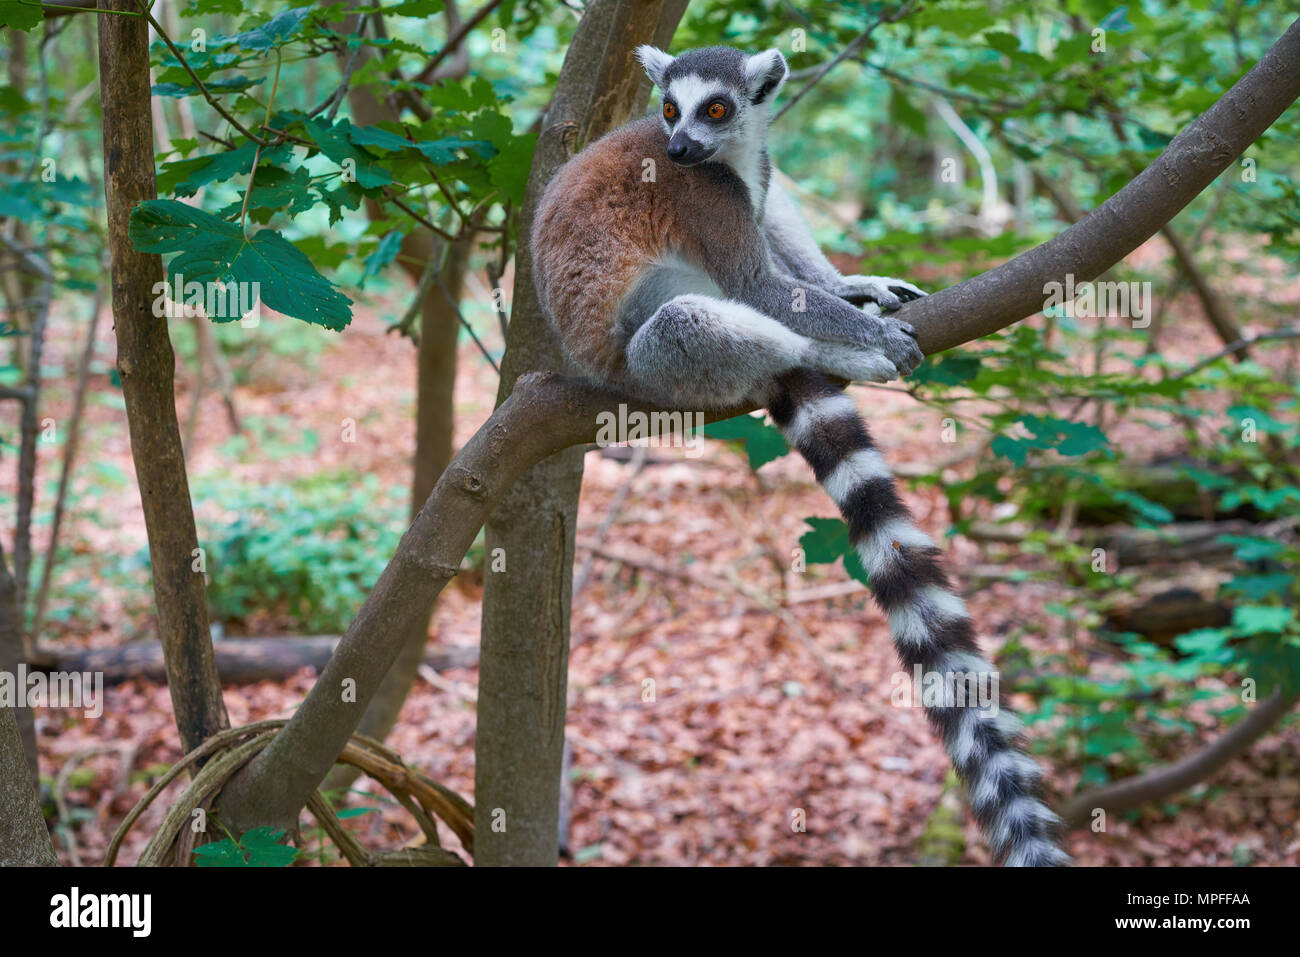 Ring tailed lemur outdoor forest image Stock Photo